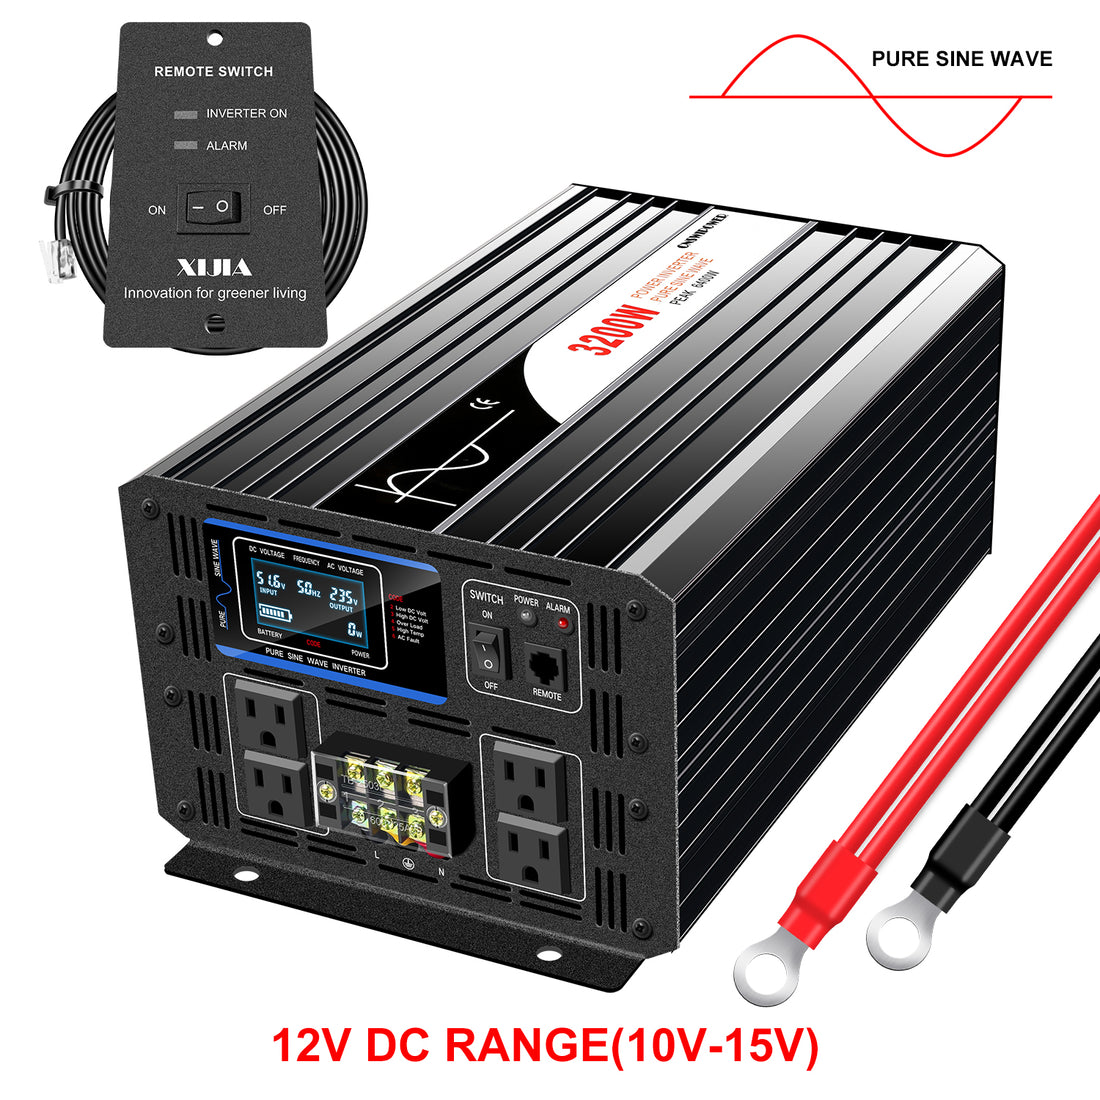 SWIPOWER Pure Sine Wave Inverter 24V DC to AC 120V 3000W 3200Watt for home use